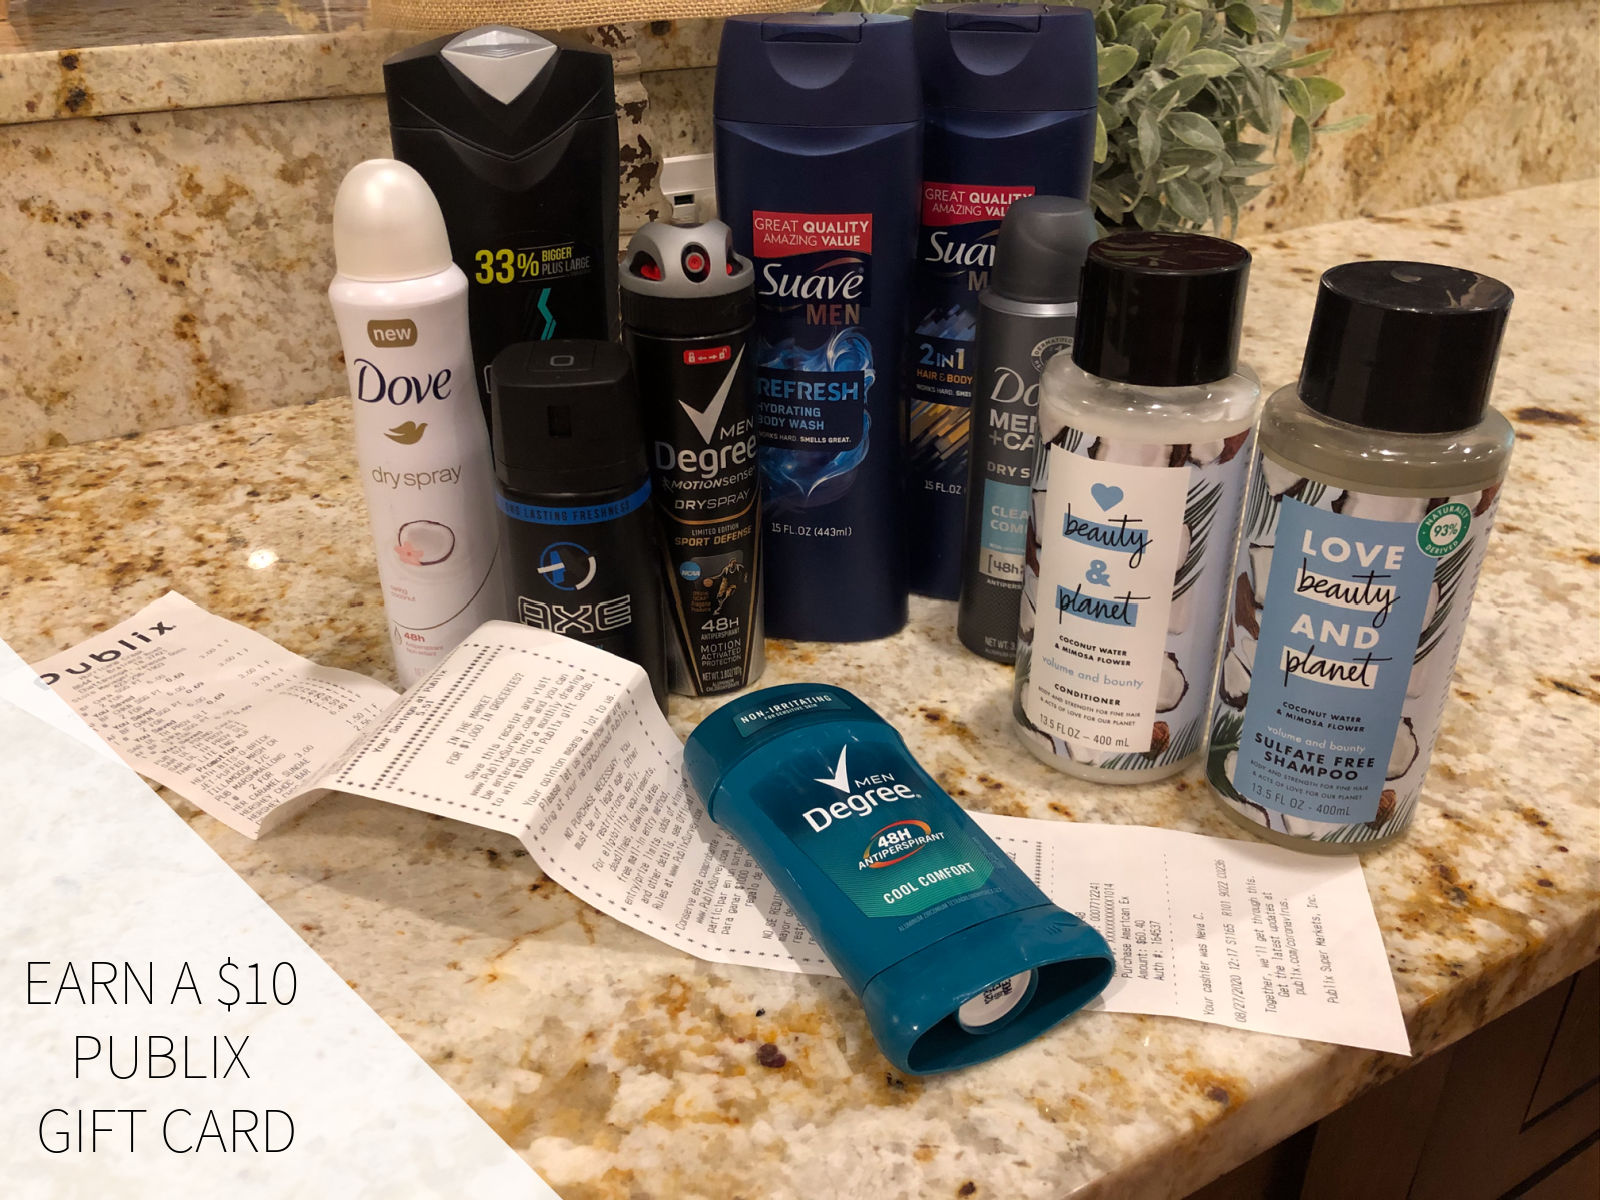 Purchase Your Favorite Unilever Personal Care Products At Publix And Earn Up To $50 In Gift Cards on I Heart Publix 1